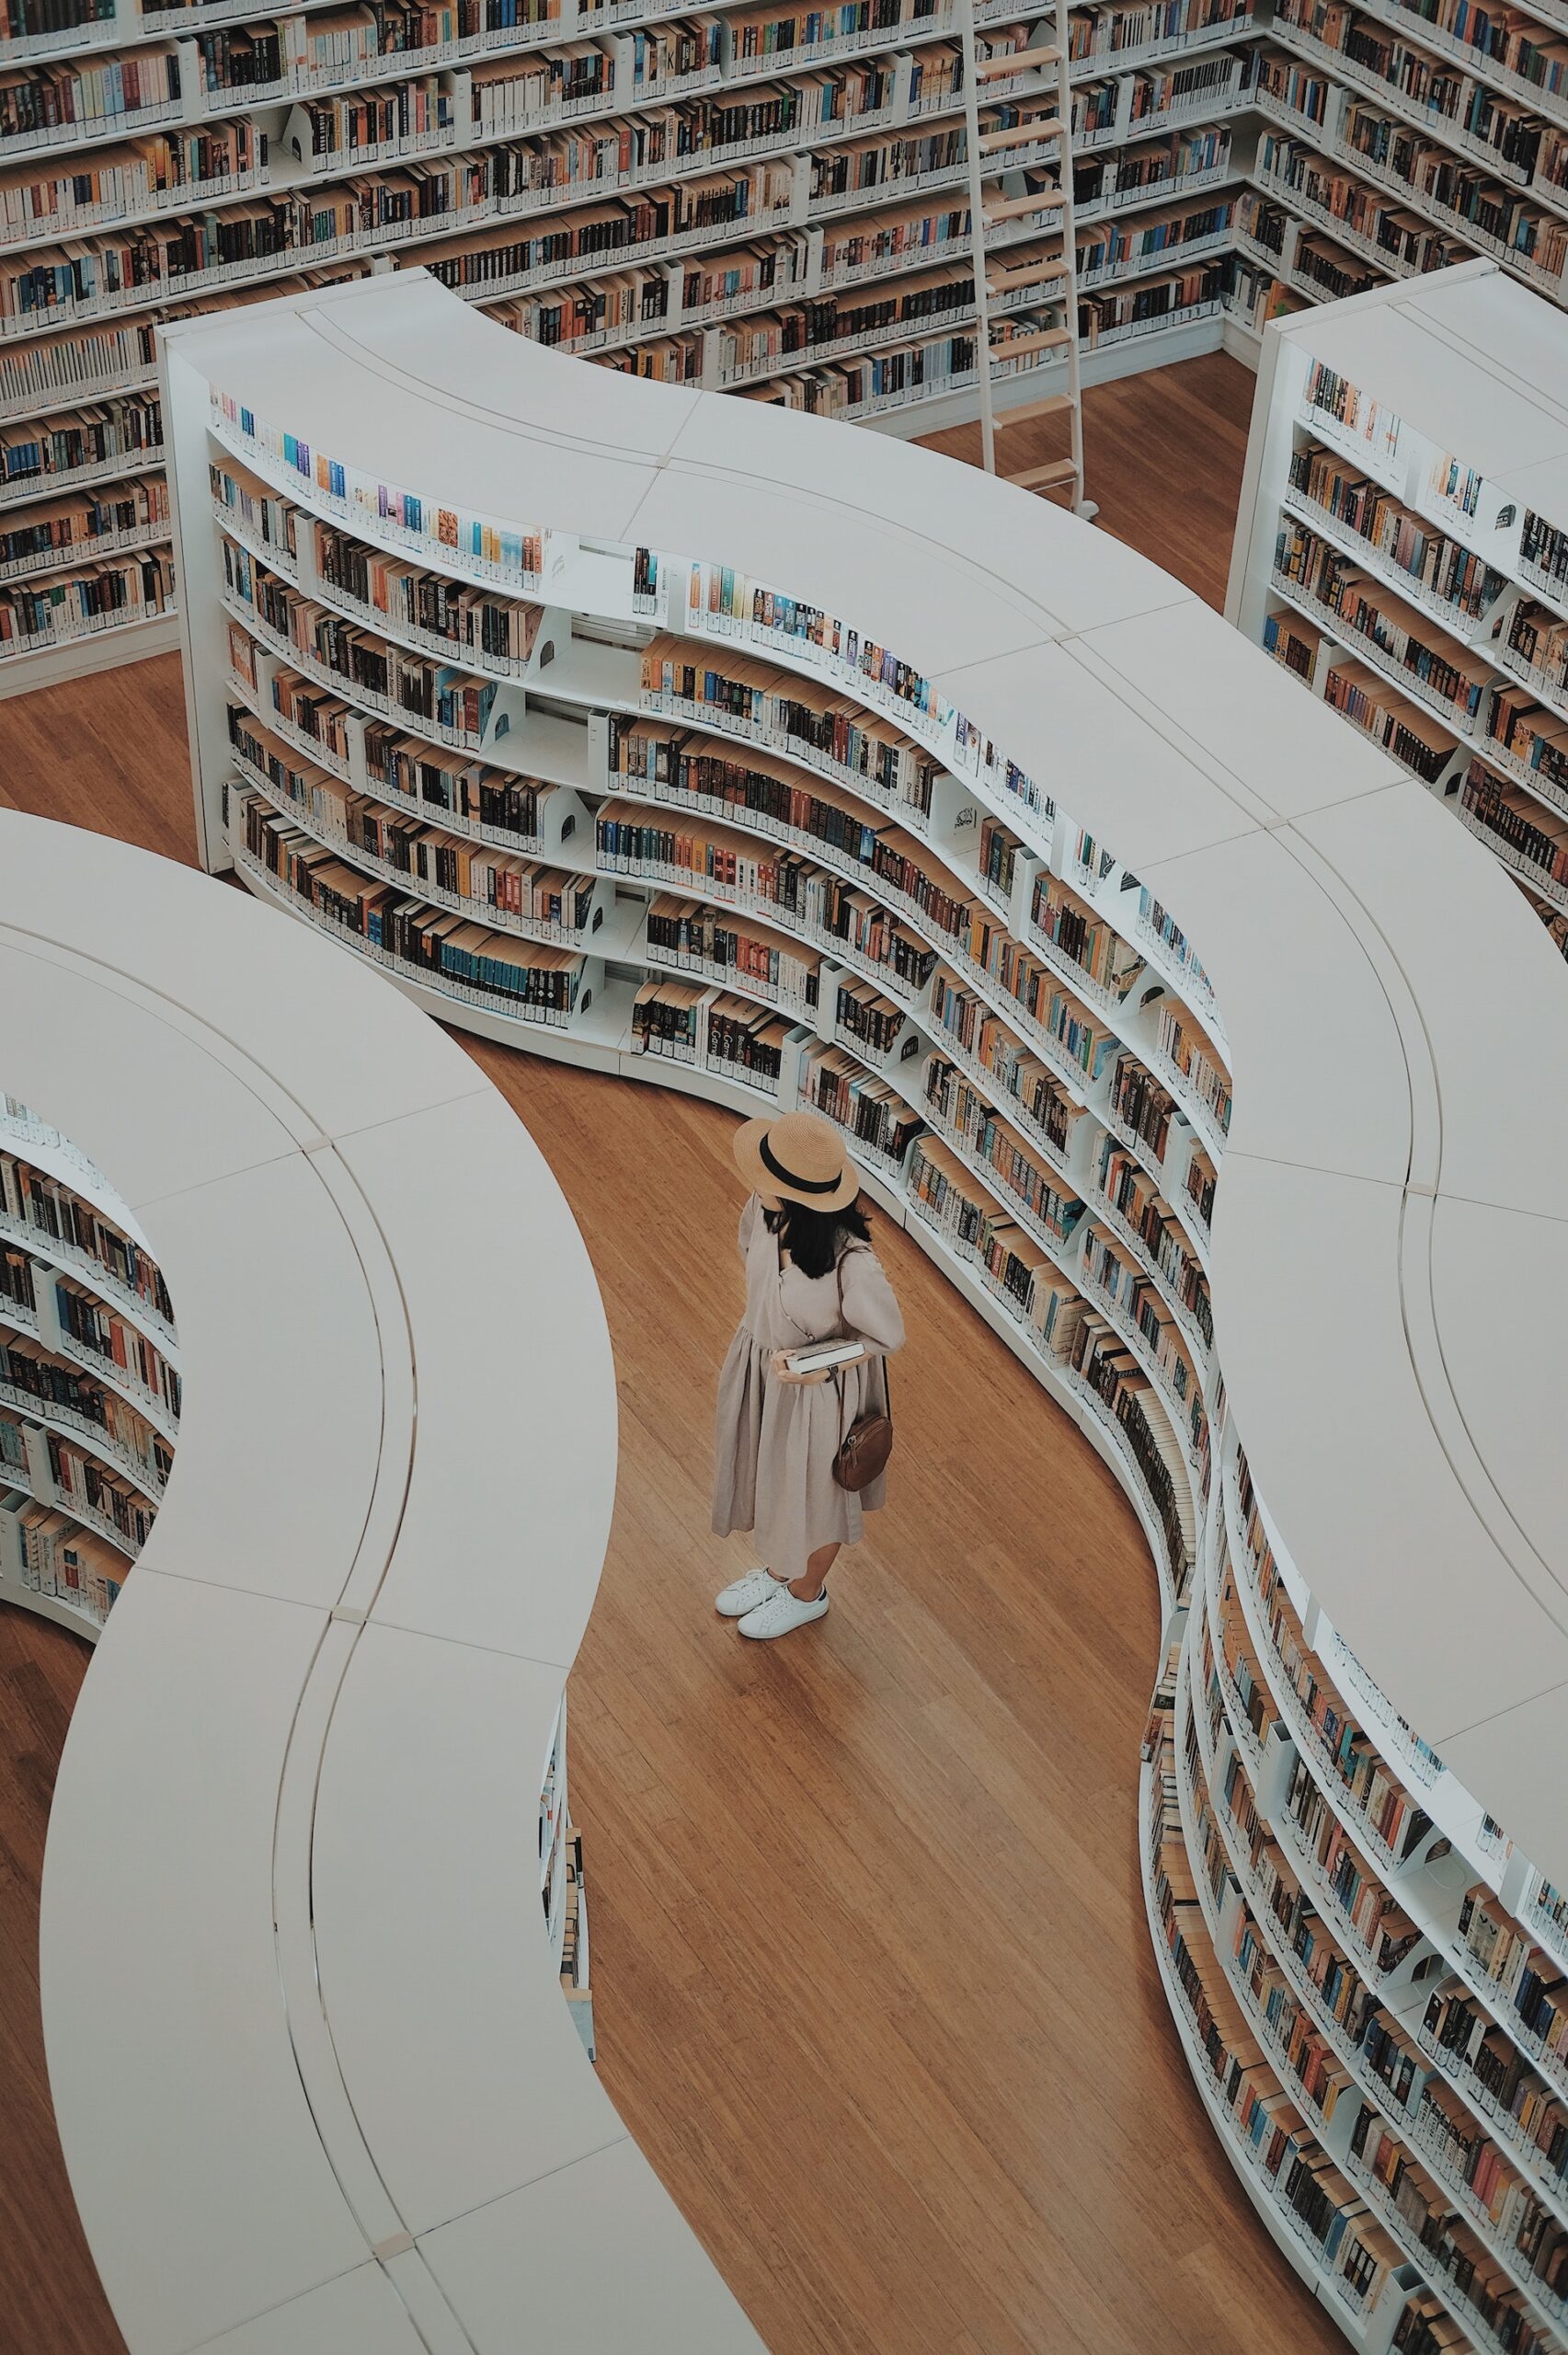 Lady standing in library with curved shelves